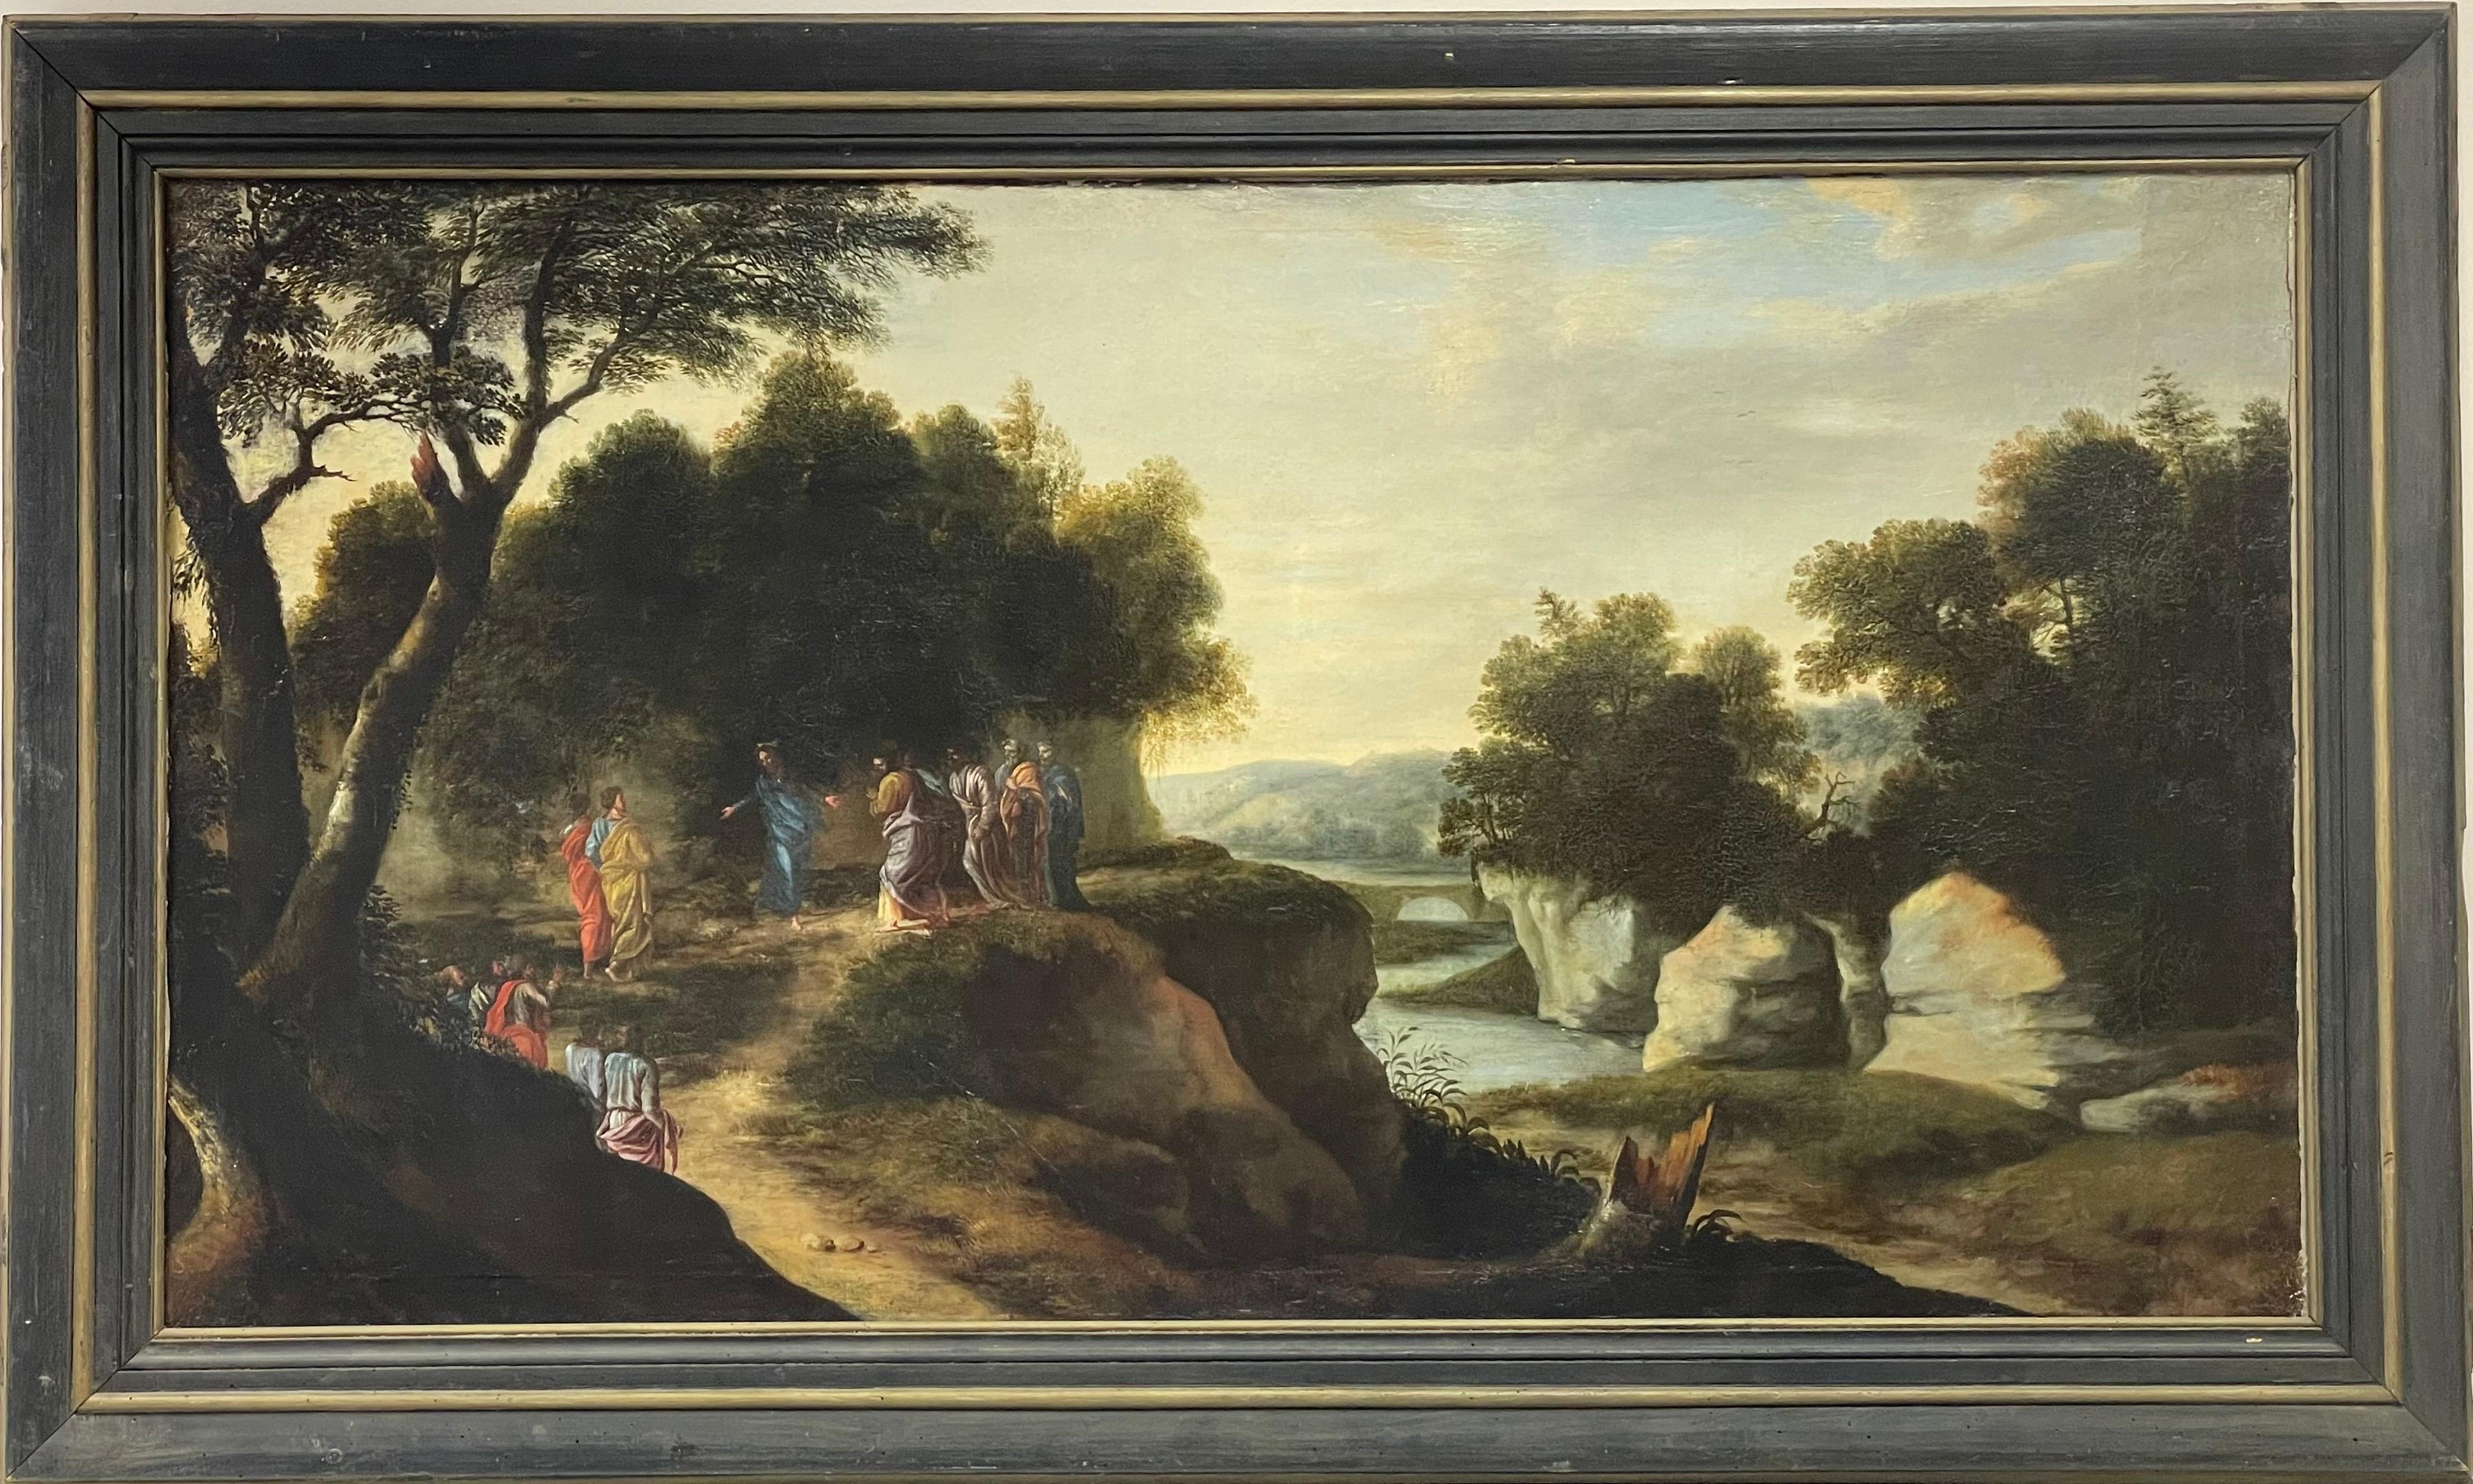 Unknown Figurative Painting - Huge 18th Century French Old Master Oil Painting Christ Preaching to Disciples